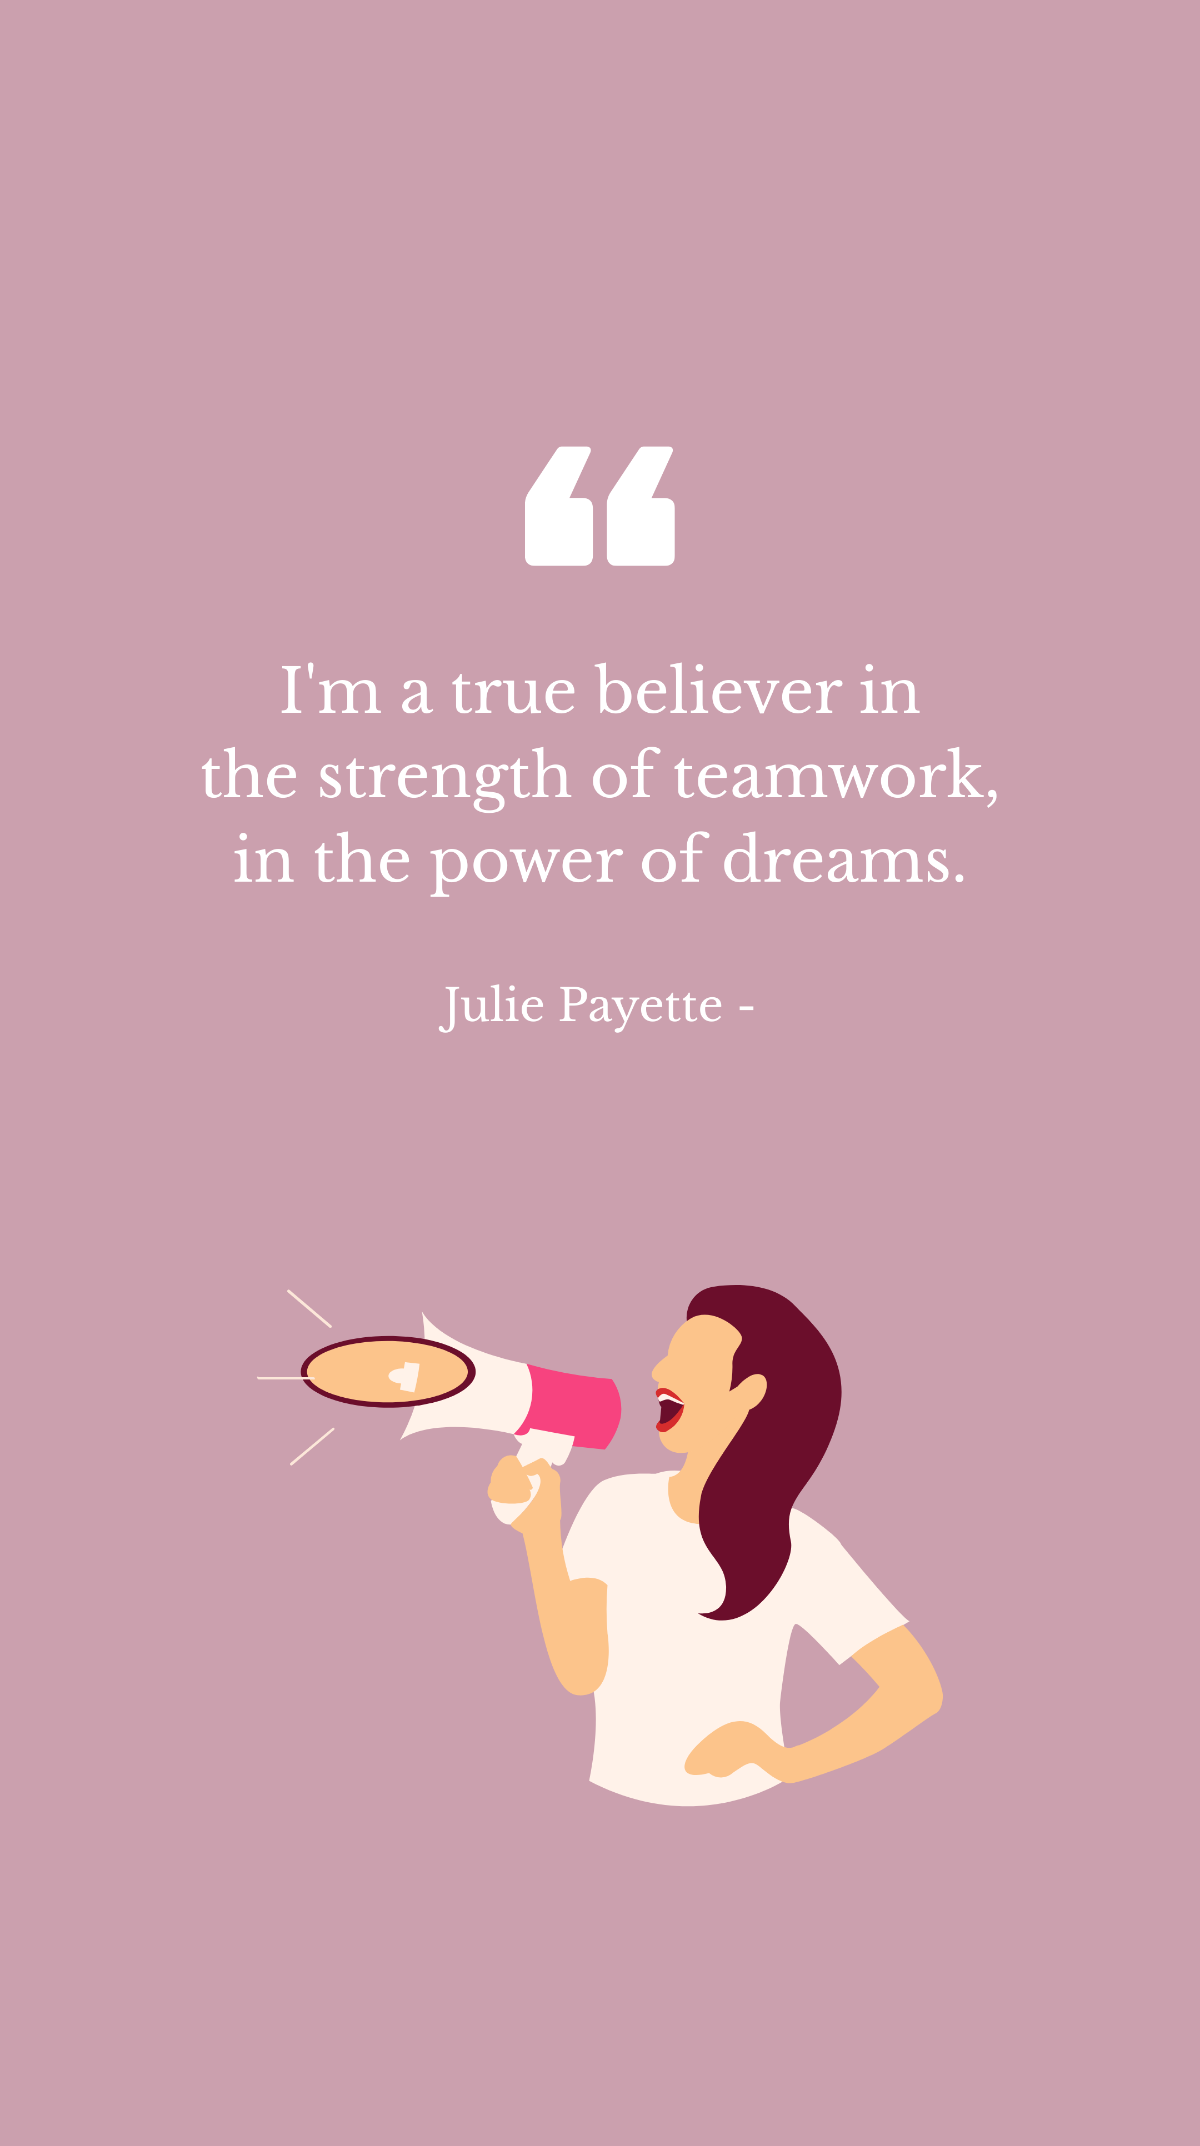 Julie Payette - I'm a true believer in the strength of teamwork, in the power of dreams.